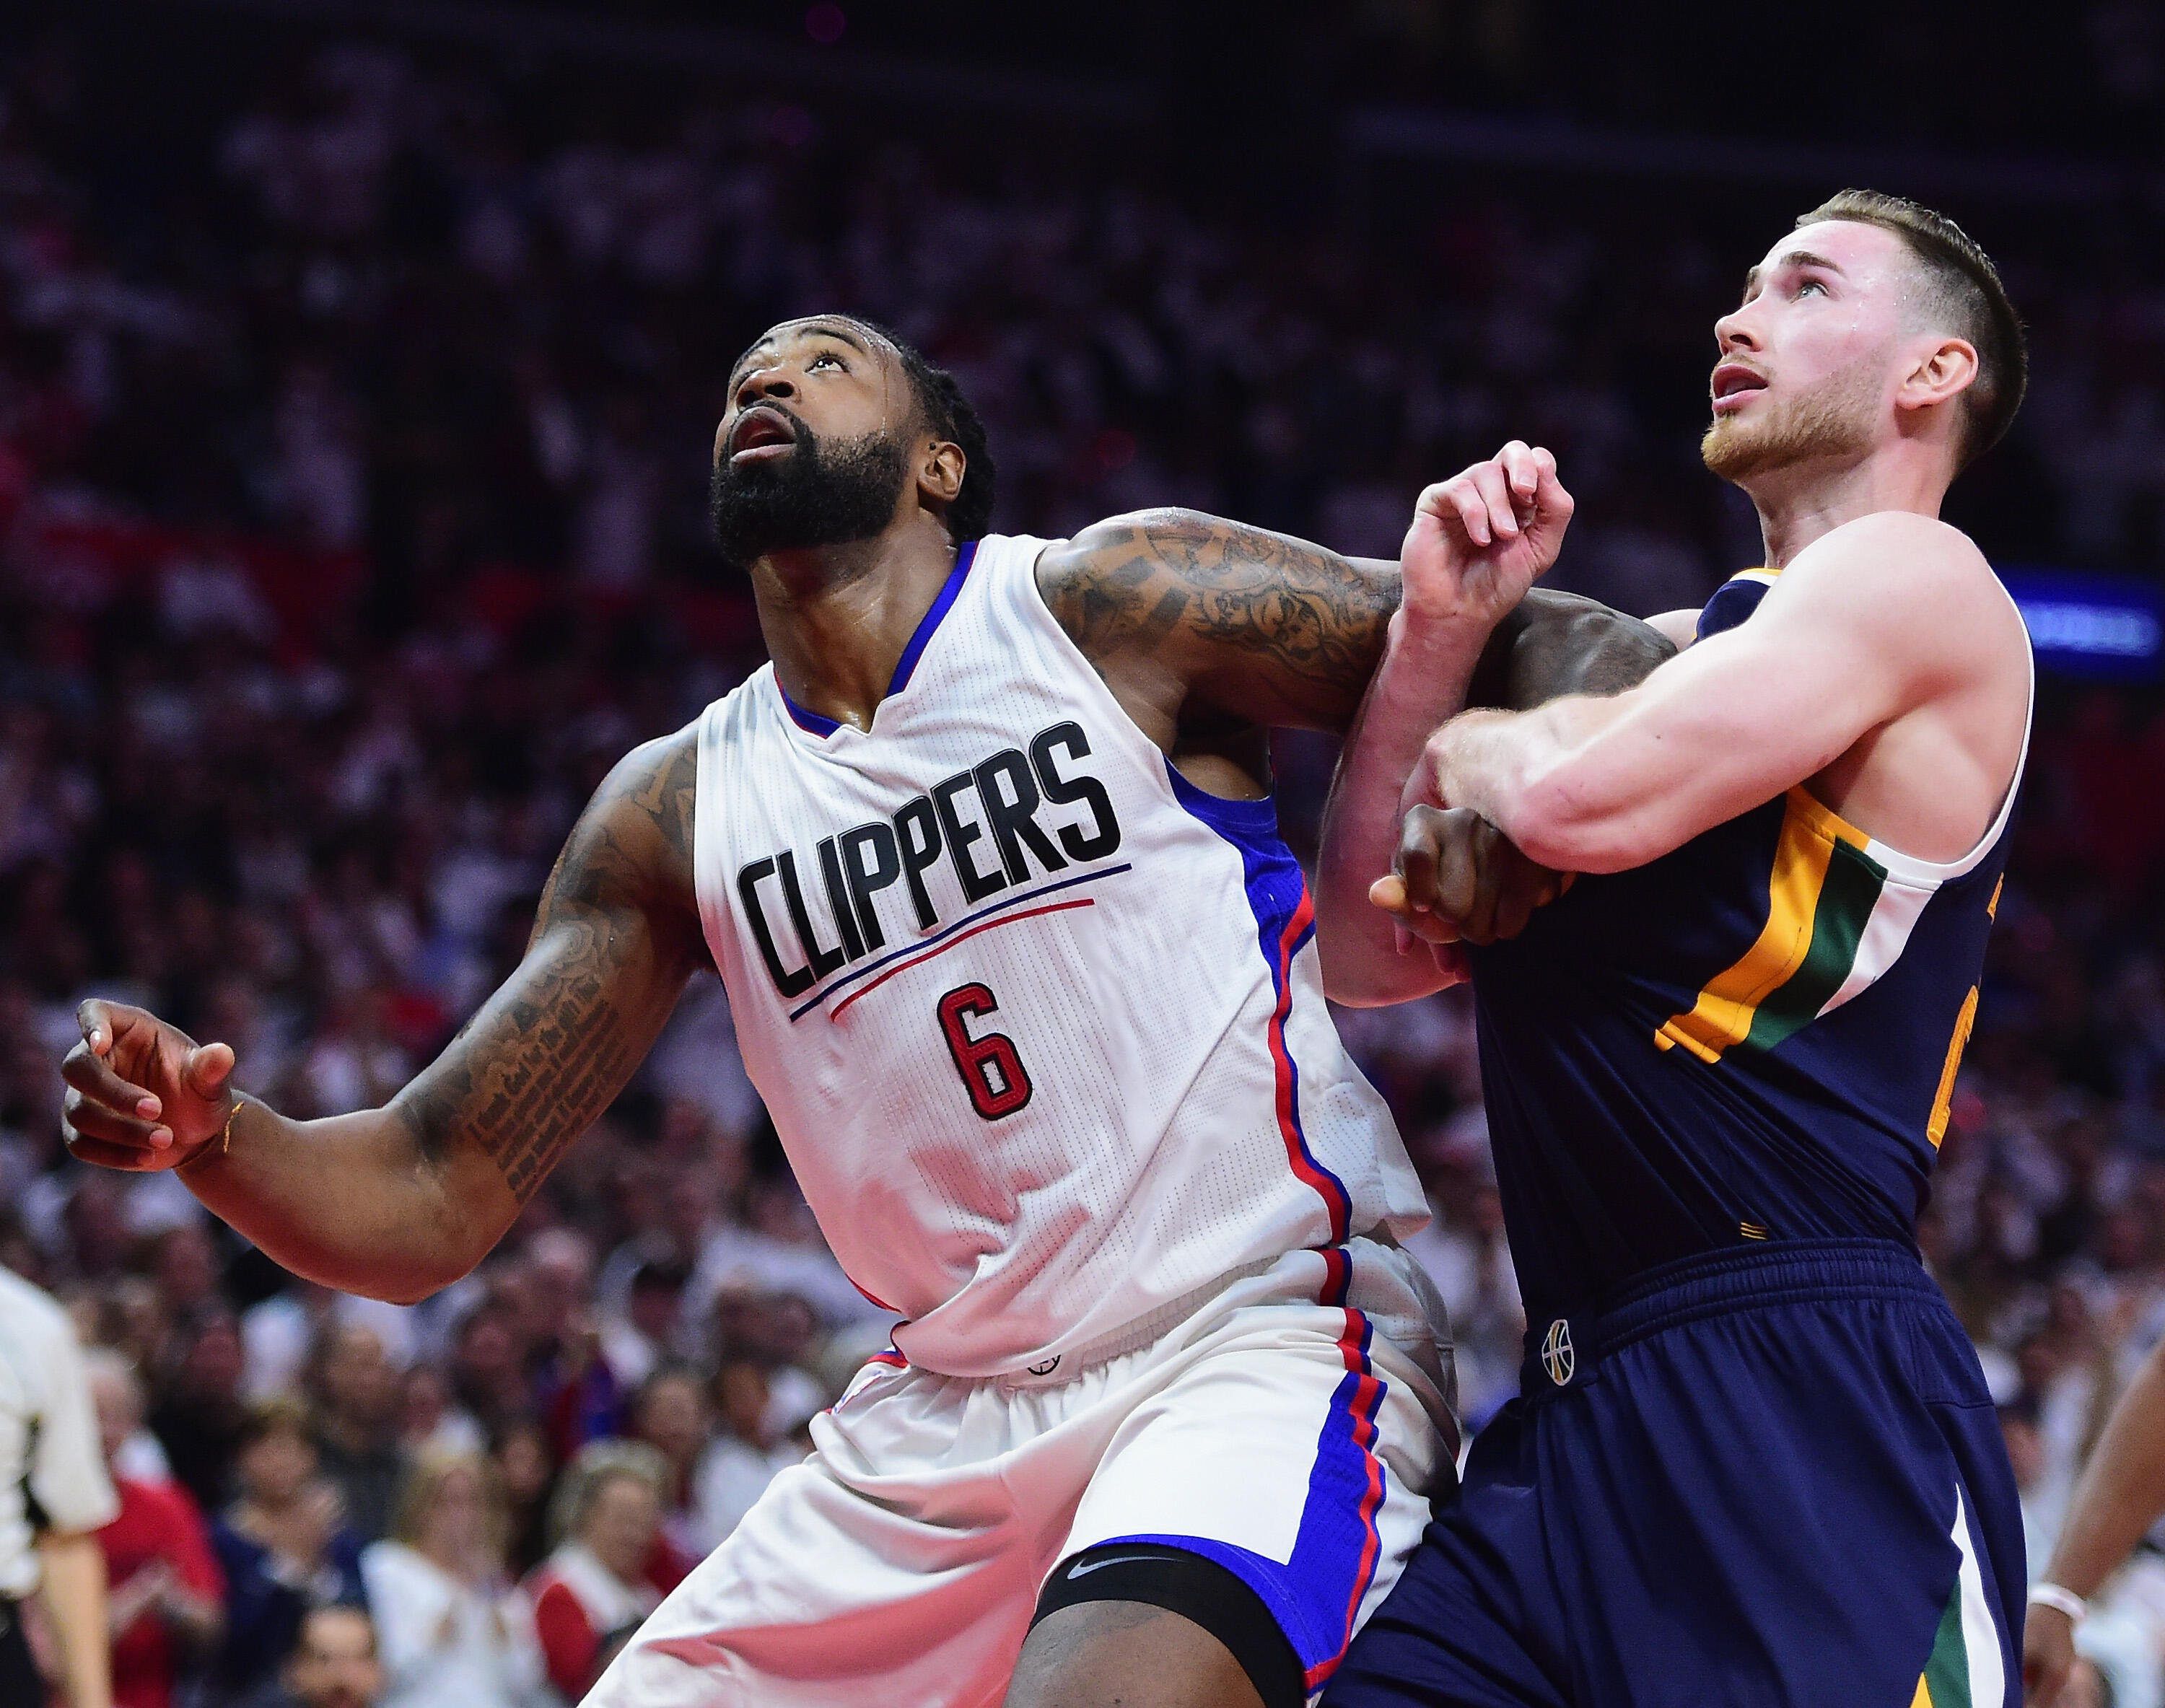 LOS ANGELES, CA - APRIL 15:  DeAndre Jordan #6 of the LA Clippers fends off Gordon Hayward #20 of the Utah Jazz for a rebound during a 97-95 Jazz win at Staples Center on April 15, 2017 in Los Angeles, California.  NOTE TO USER: User expressly acknowledge